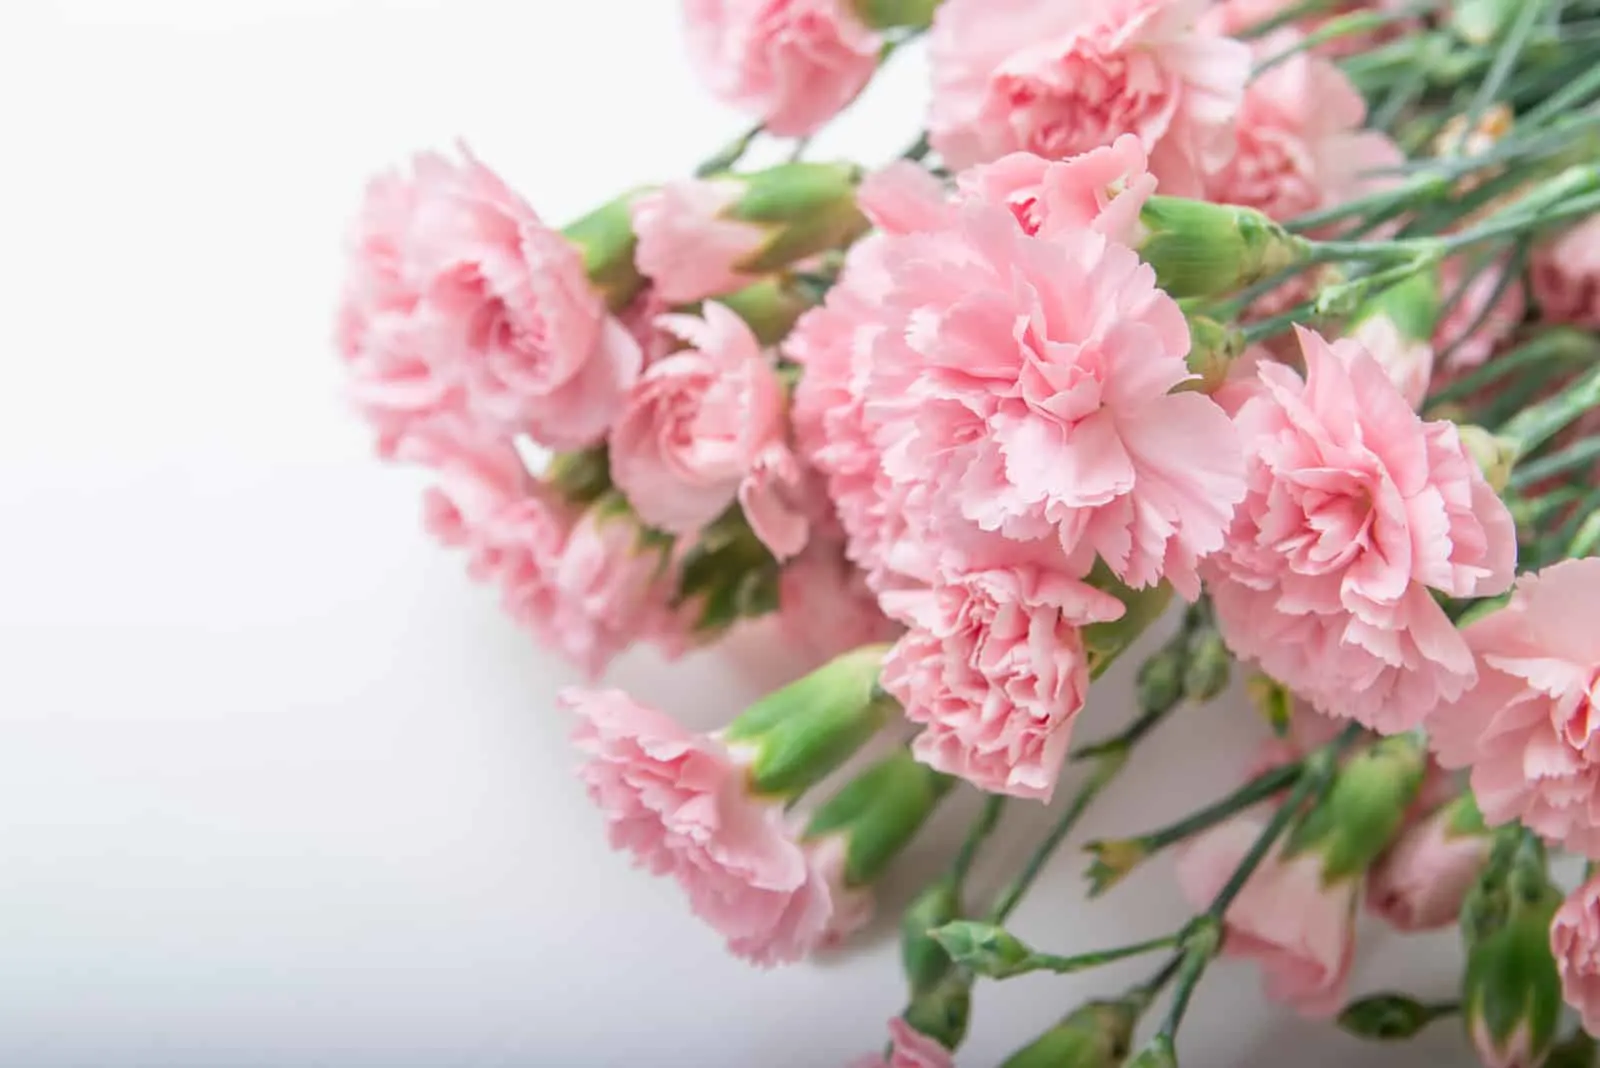 Small bouquet of pink carnations